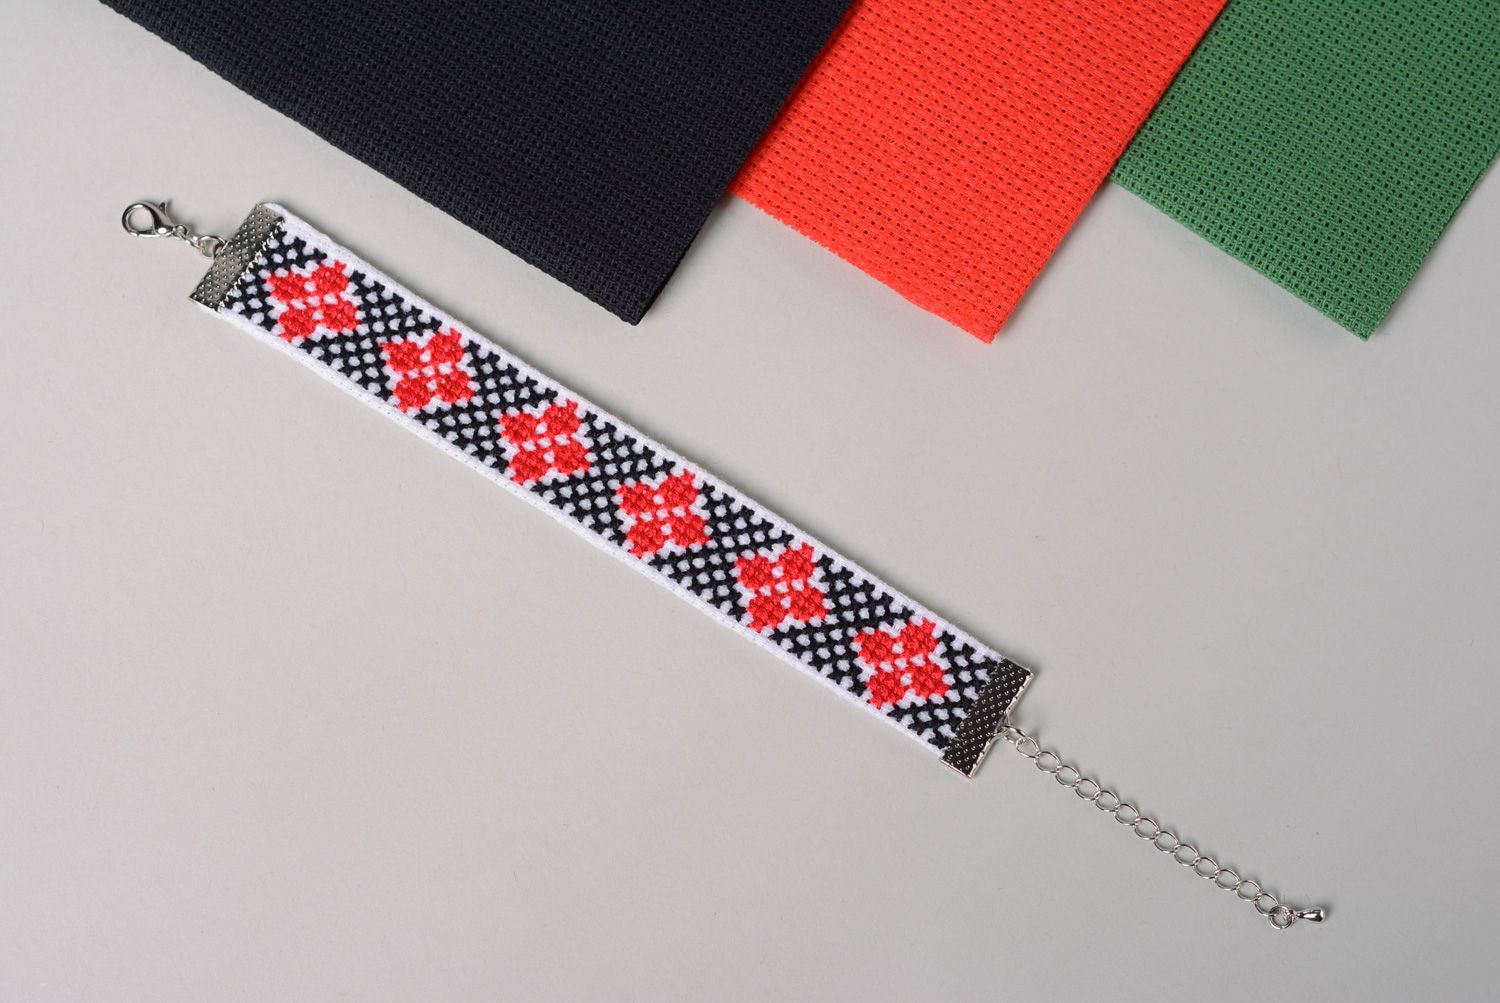 Handmade wrist bracelet with ethnic embroidery in red, white and black colors photo 1